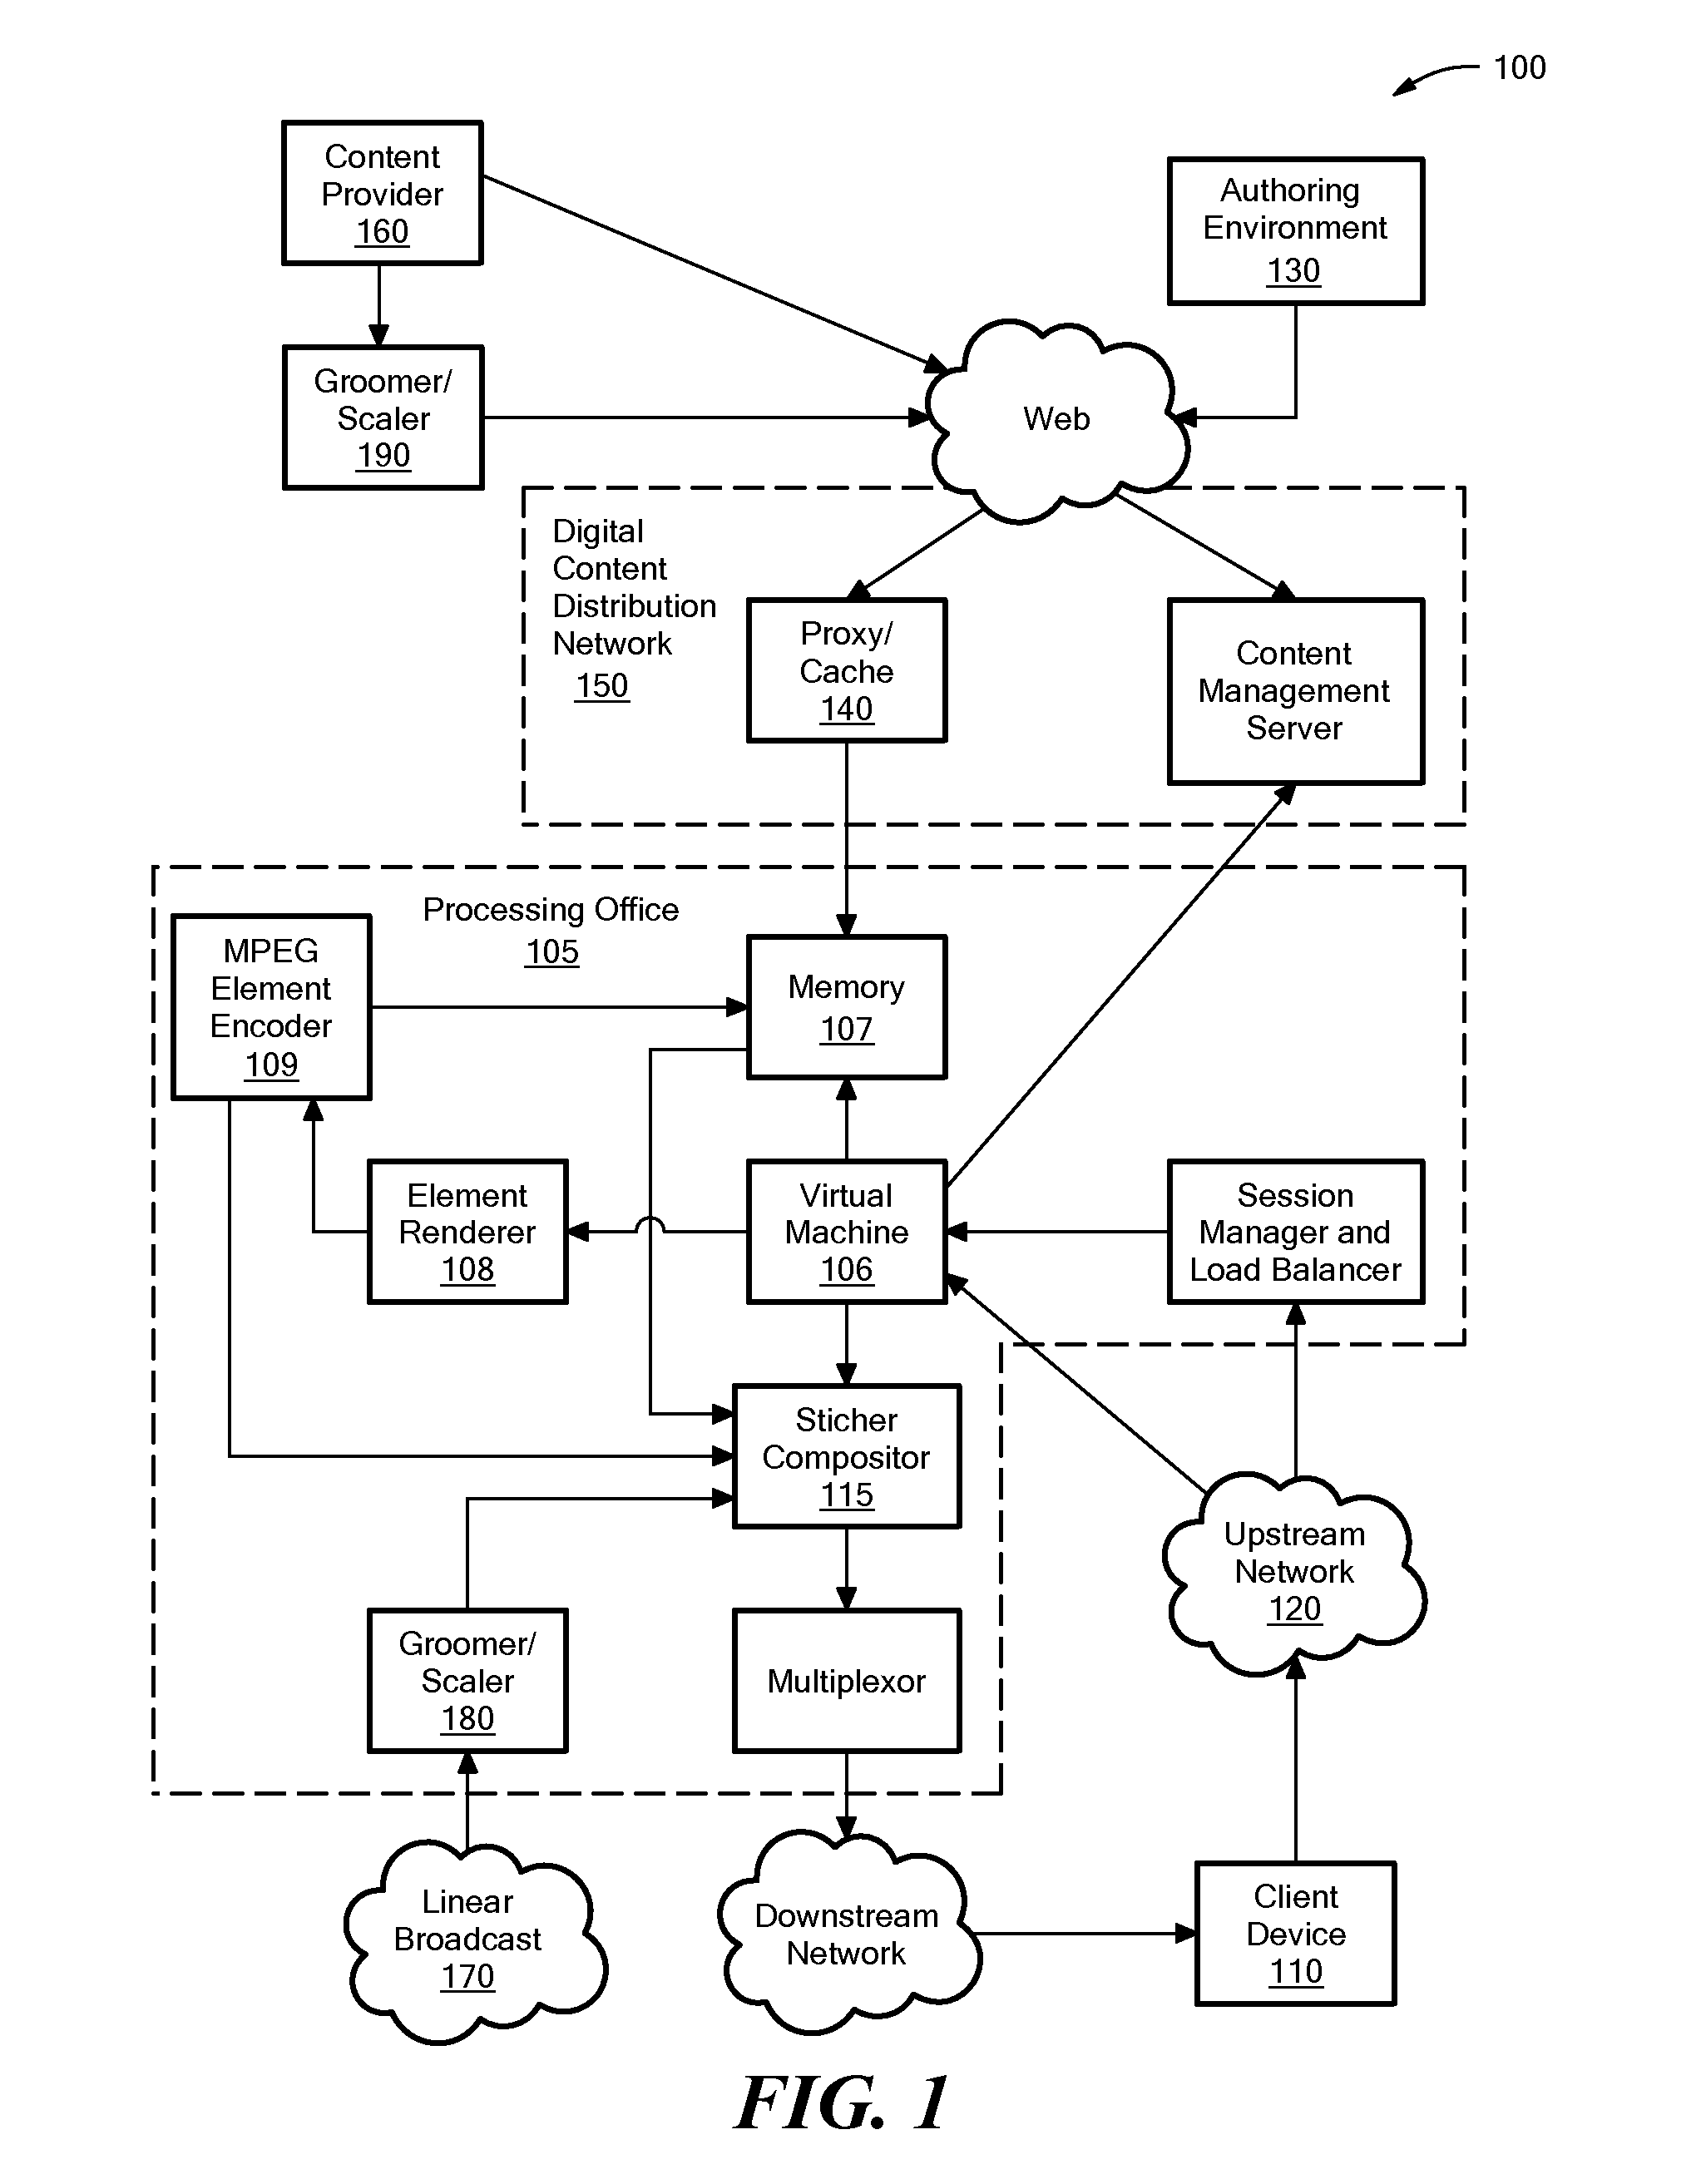 Providing Television Broadcasts over a Managed Network and Interactive Content over an Unmanaged Network to a Client Device